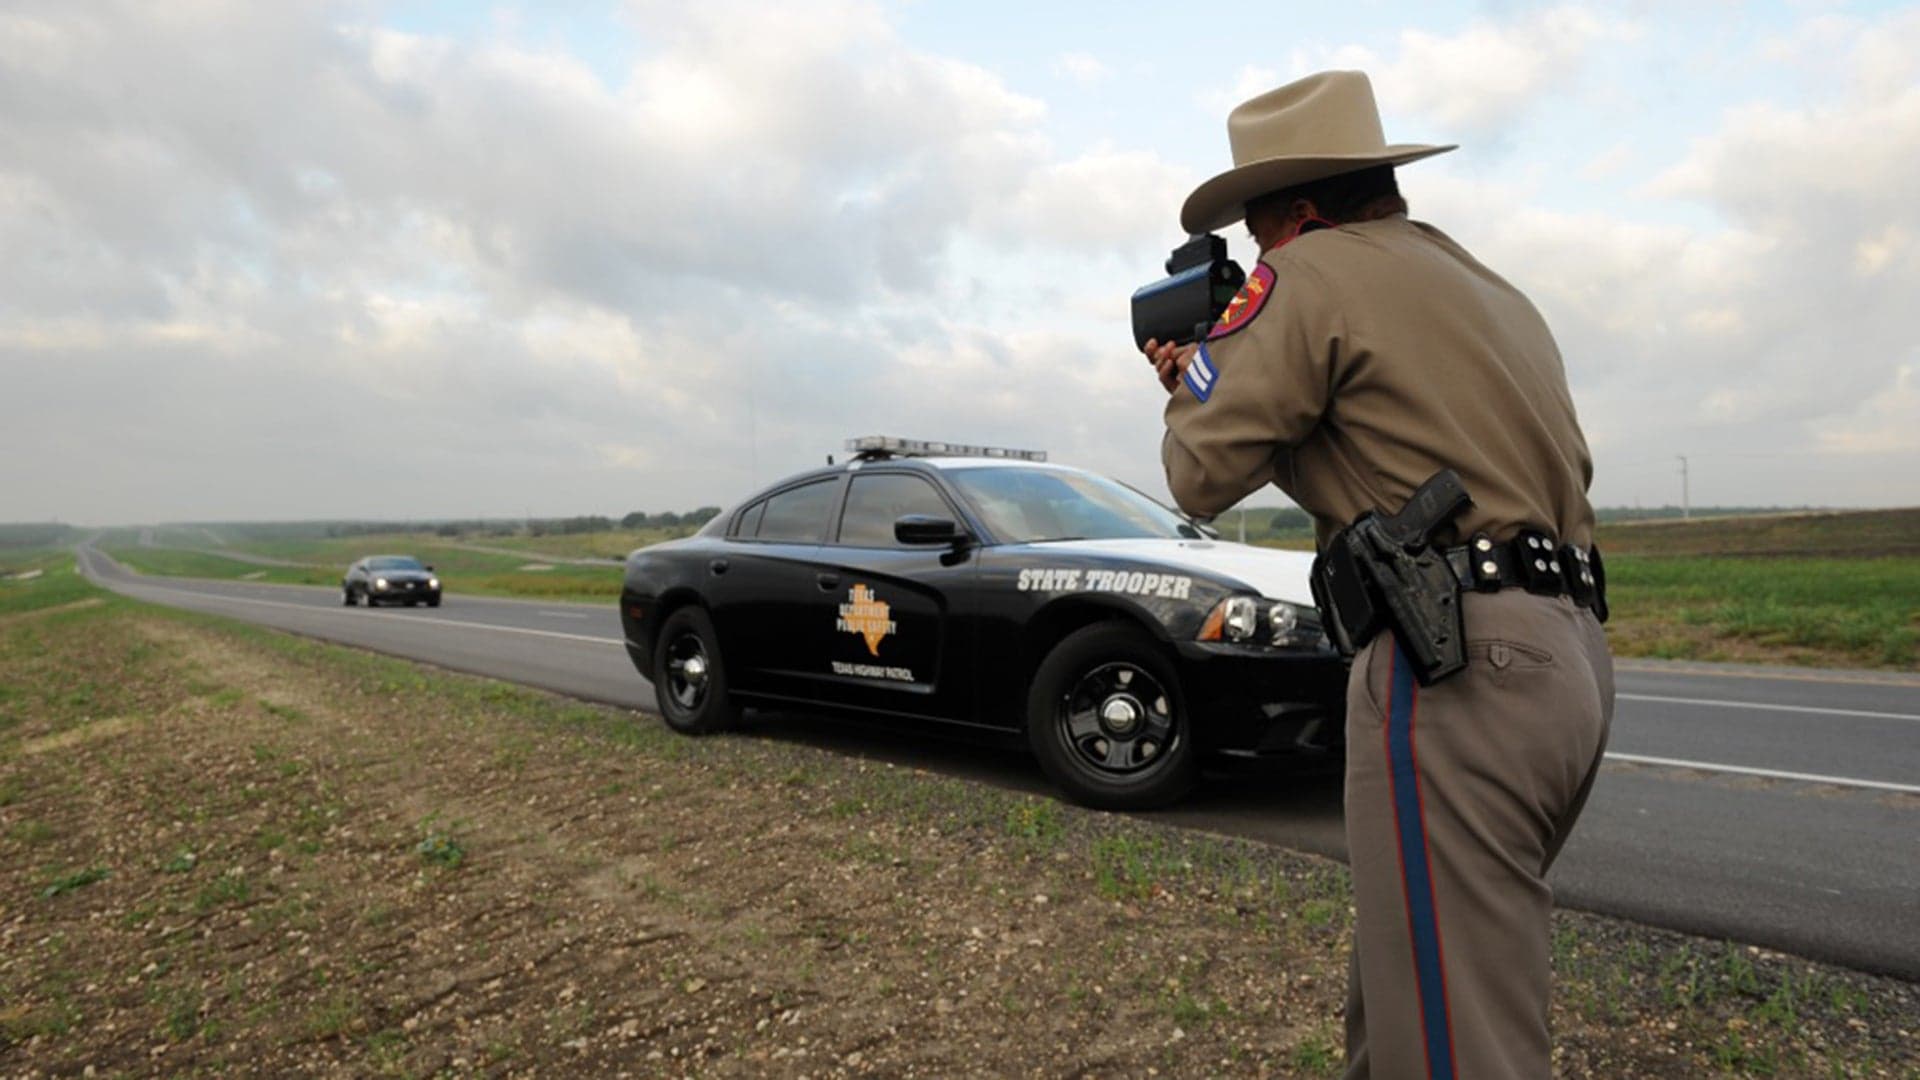 181 in a 75: Here Are the 20 Fastest Speeding Tickets in Texas in 2017